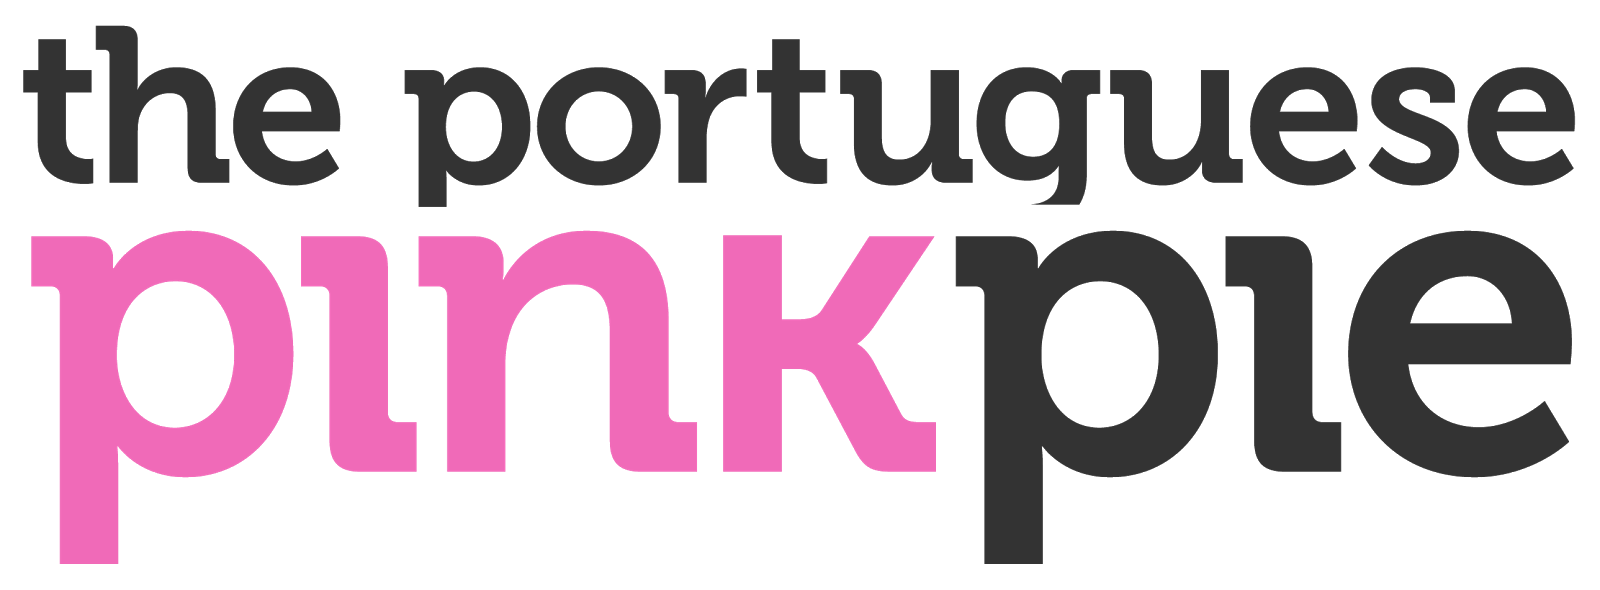 THE PORTUGUESE PINK PIE